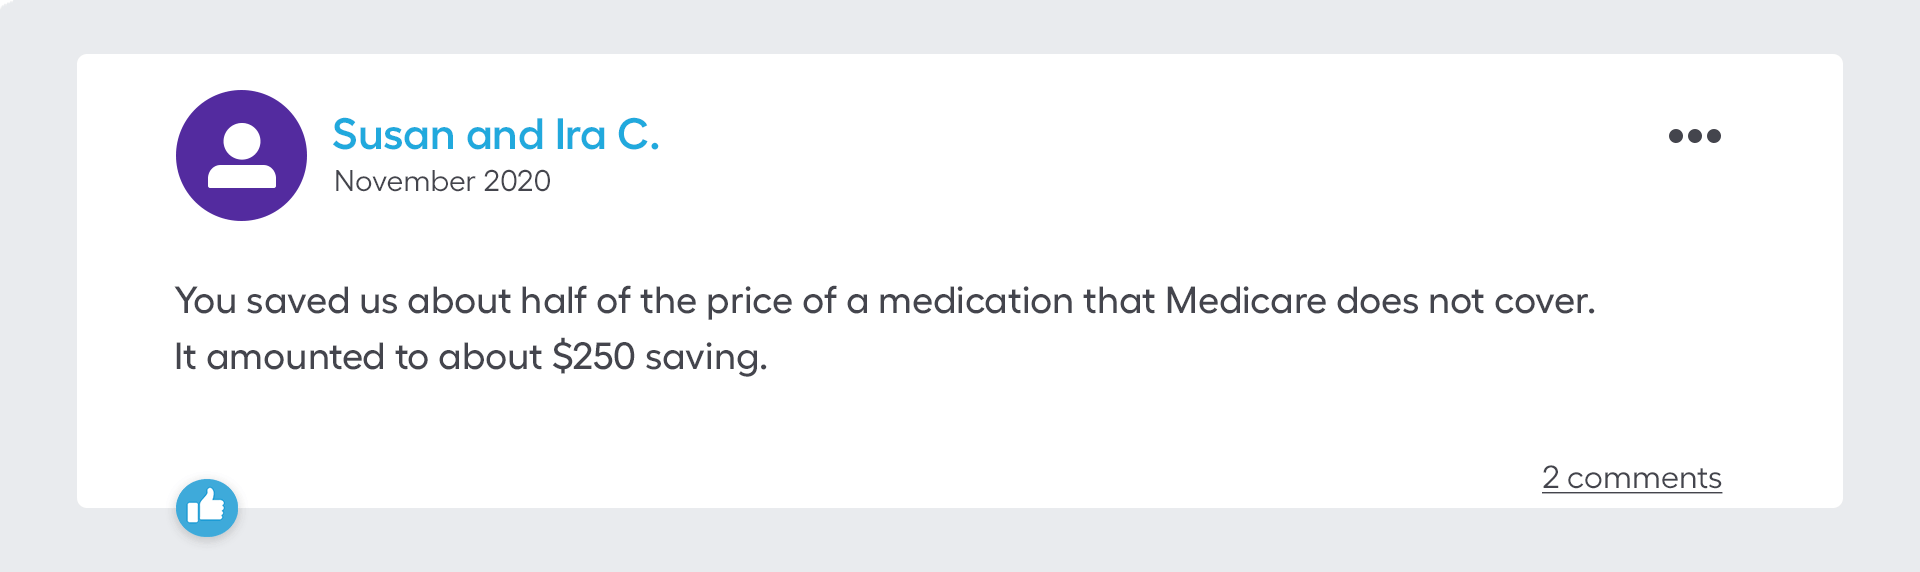 You saved us about half of the price of a medication that Medicare does not cover. It amounted to about $250 saving.